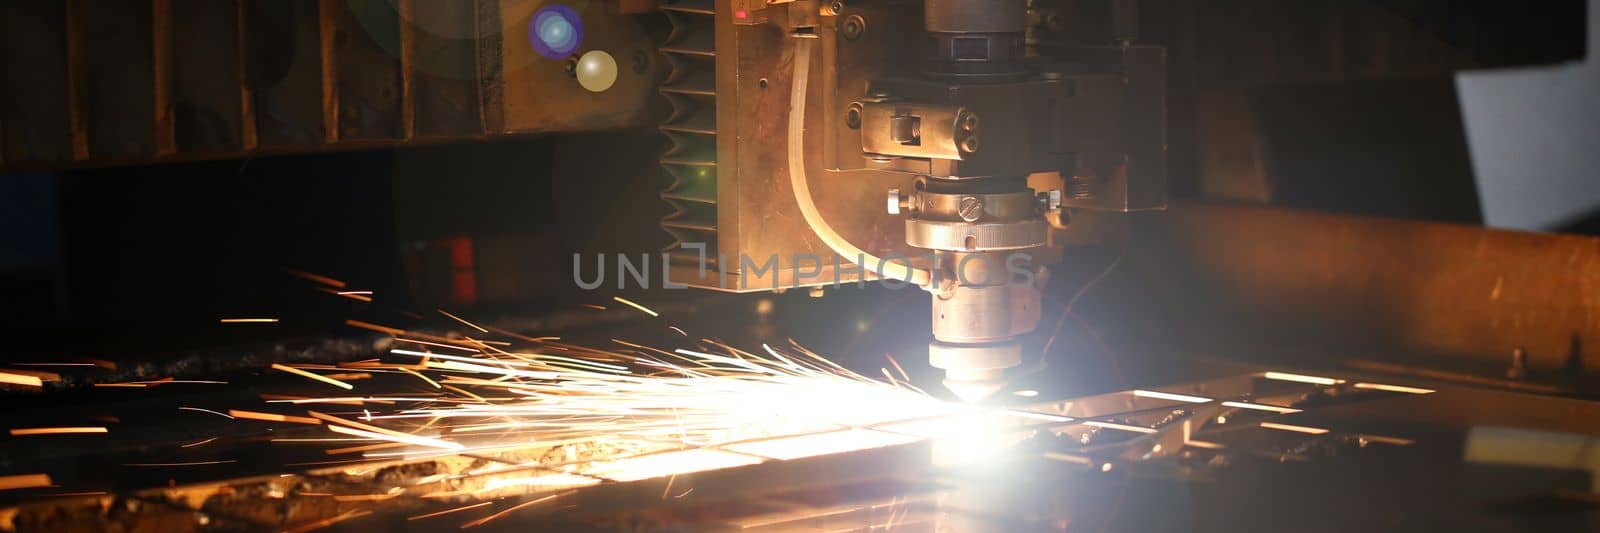 CNC Laser cutting of metal and modern industrial technologies. Metalworking and plasma cutting machines